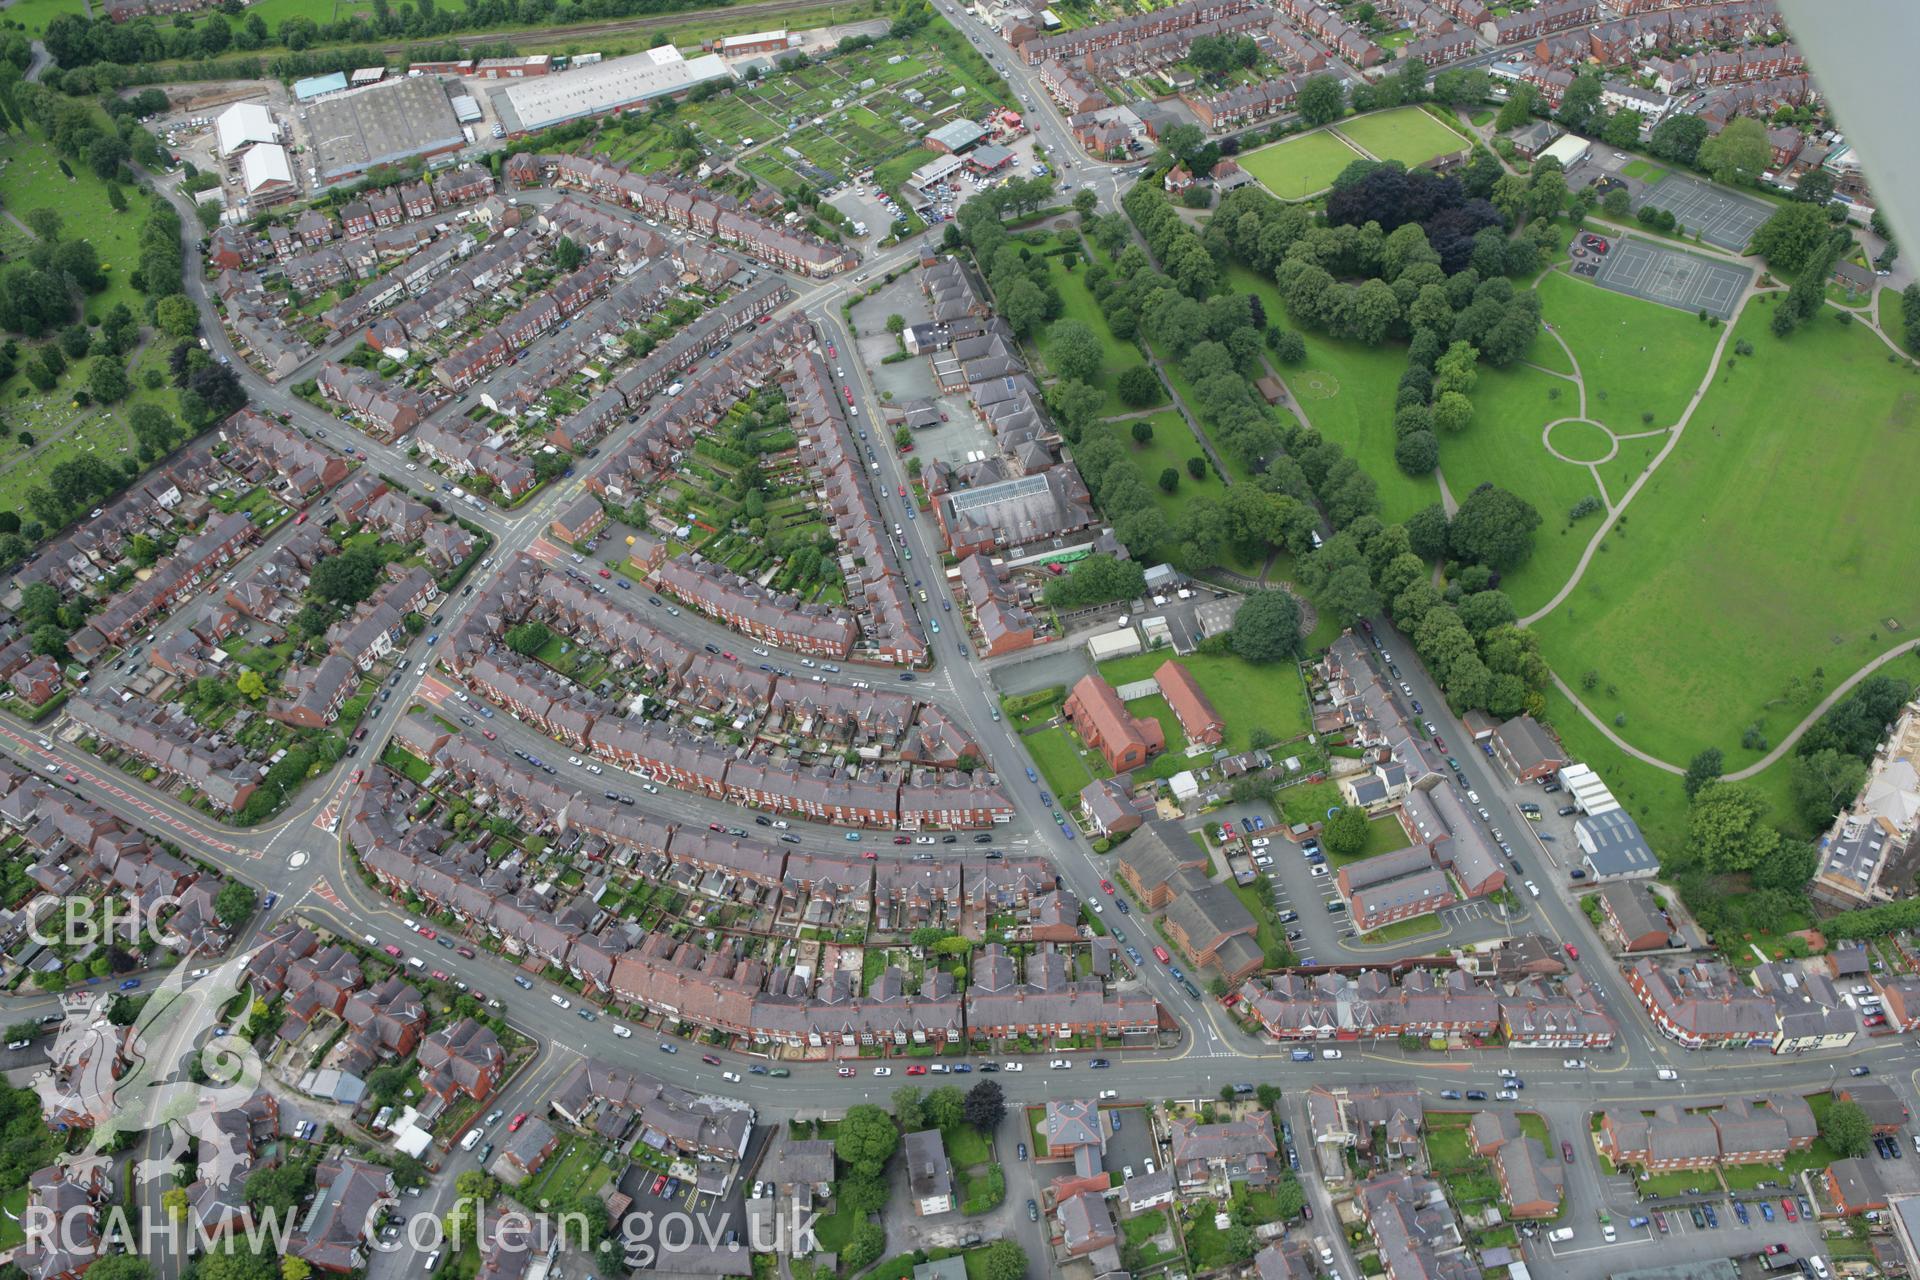 RCAHMW colour oblique aerial photograph of Wrexham showing housing in the southern part of the town. Taken on 24 July 2007 by Toby Driver